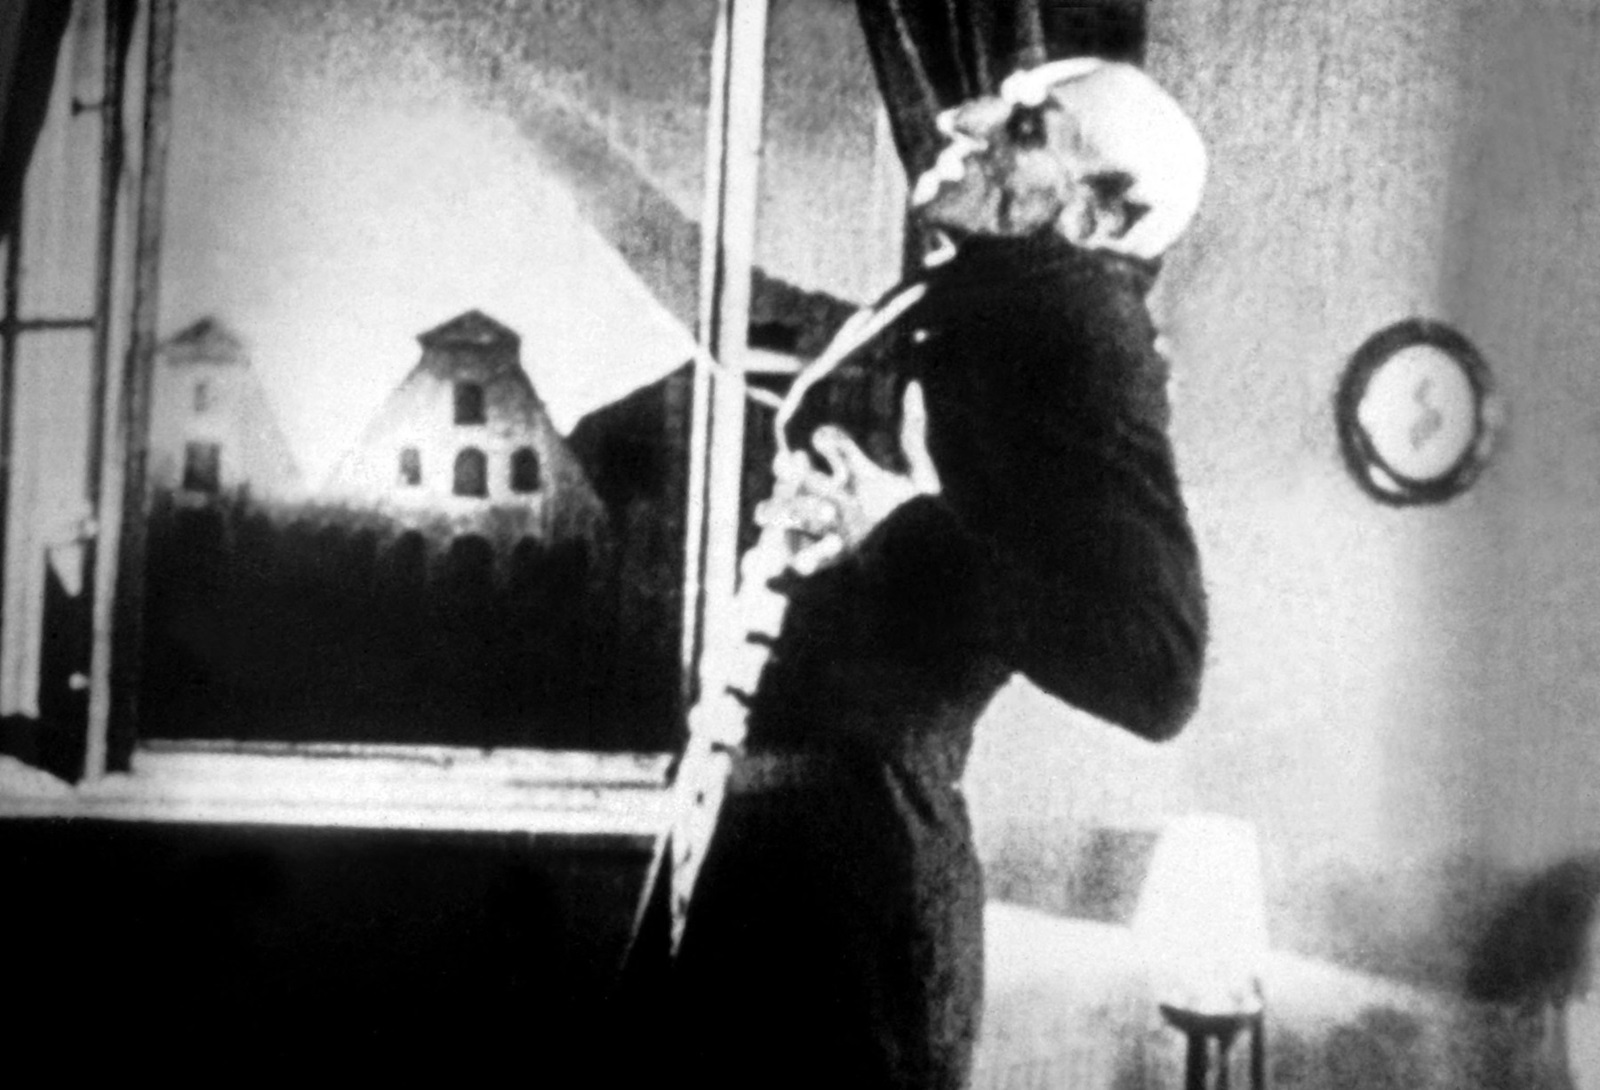 Nosfératu le vampire
Nosferatu eine symphonie des grauens
1922
réal : Friedrich Wilhelm Murnau
Max Schreck
Collection Christophel,Image: 209486498, License: Rights-managed, Restrictions: Restricted to editorial use related to the film or the individuals involved (producers, directors, authors, actors, etc.)
The rights of publicity of any person depicted in the photos are not granted
Mandatory credit of the film company and photographer, Model Release: no, Credit line: PRANA FILM / AFP / Profimedia